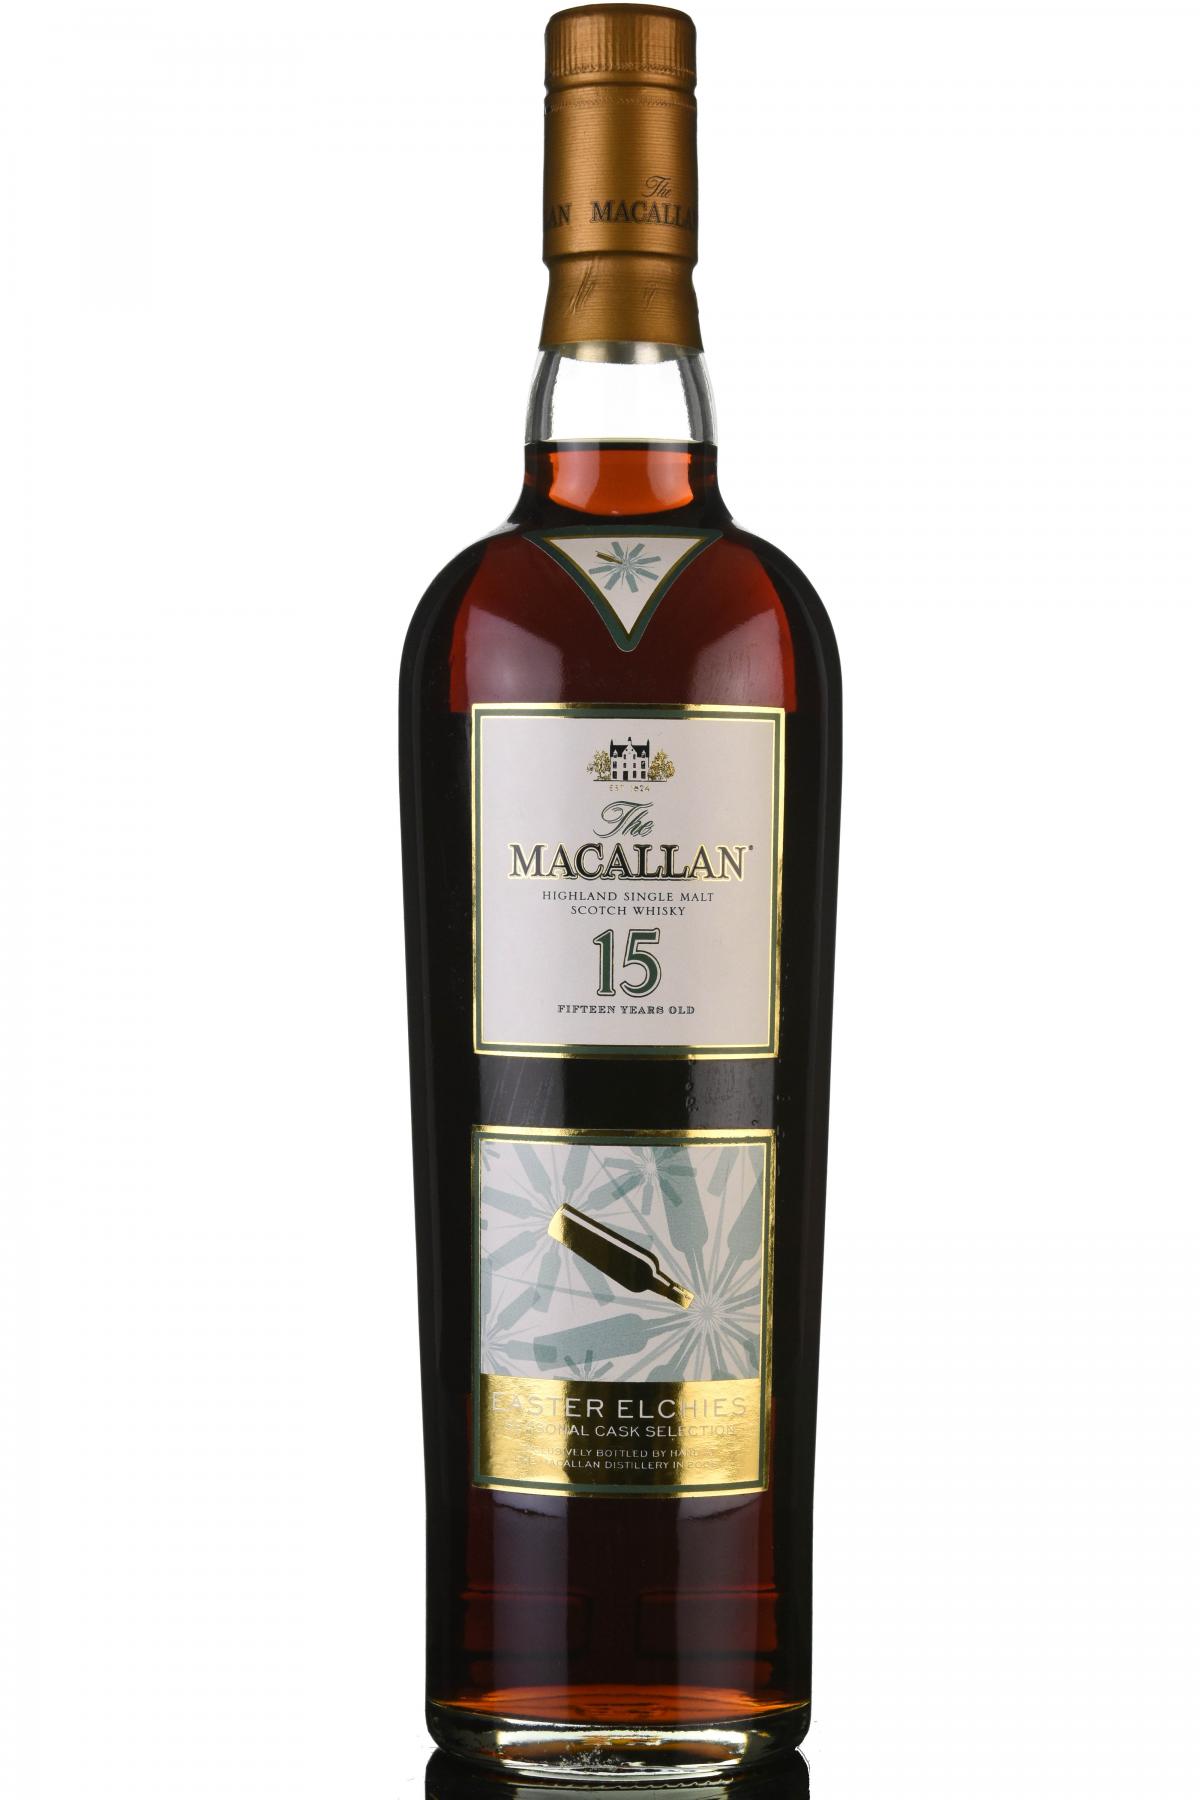 Macallan 15 Year Old - Easter Elchies